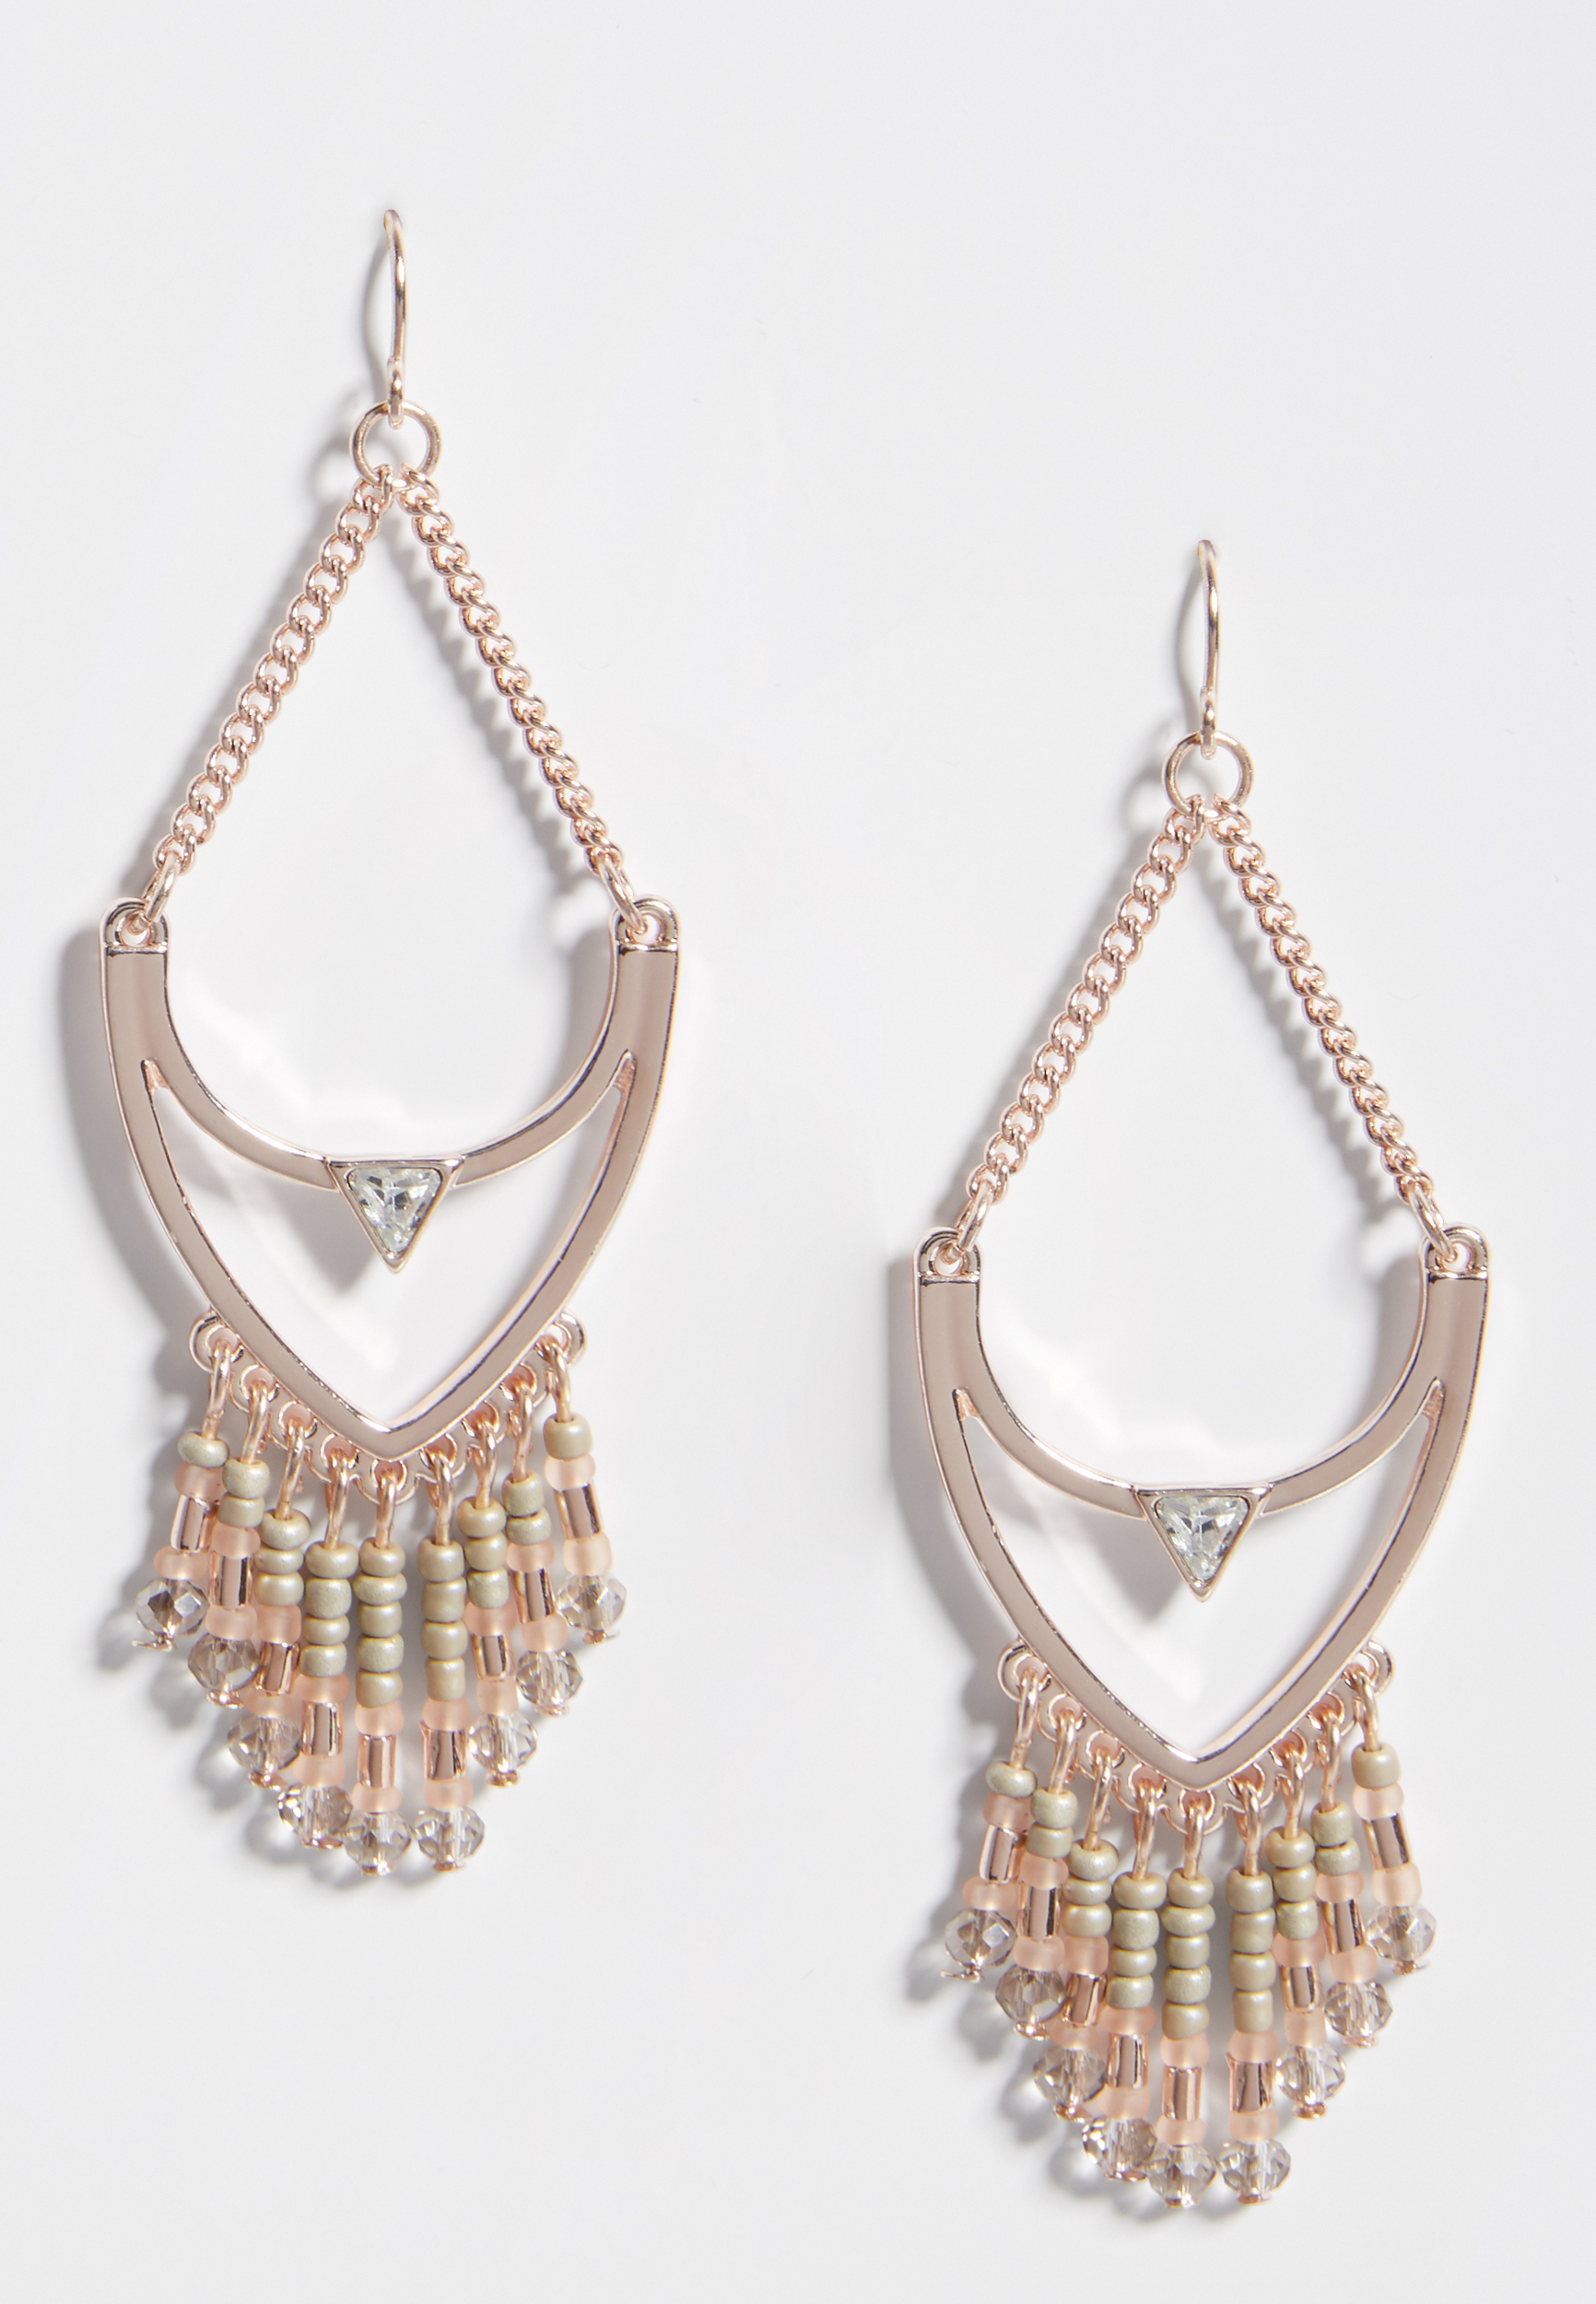 swing earrings with rhinestones and beaded fringe | maurices